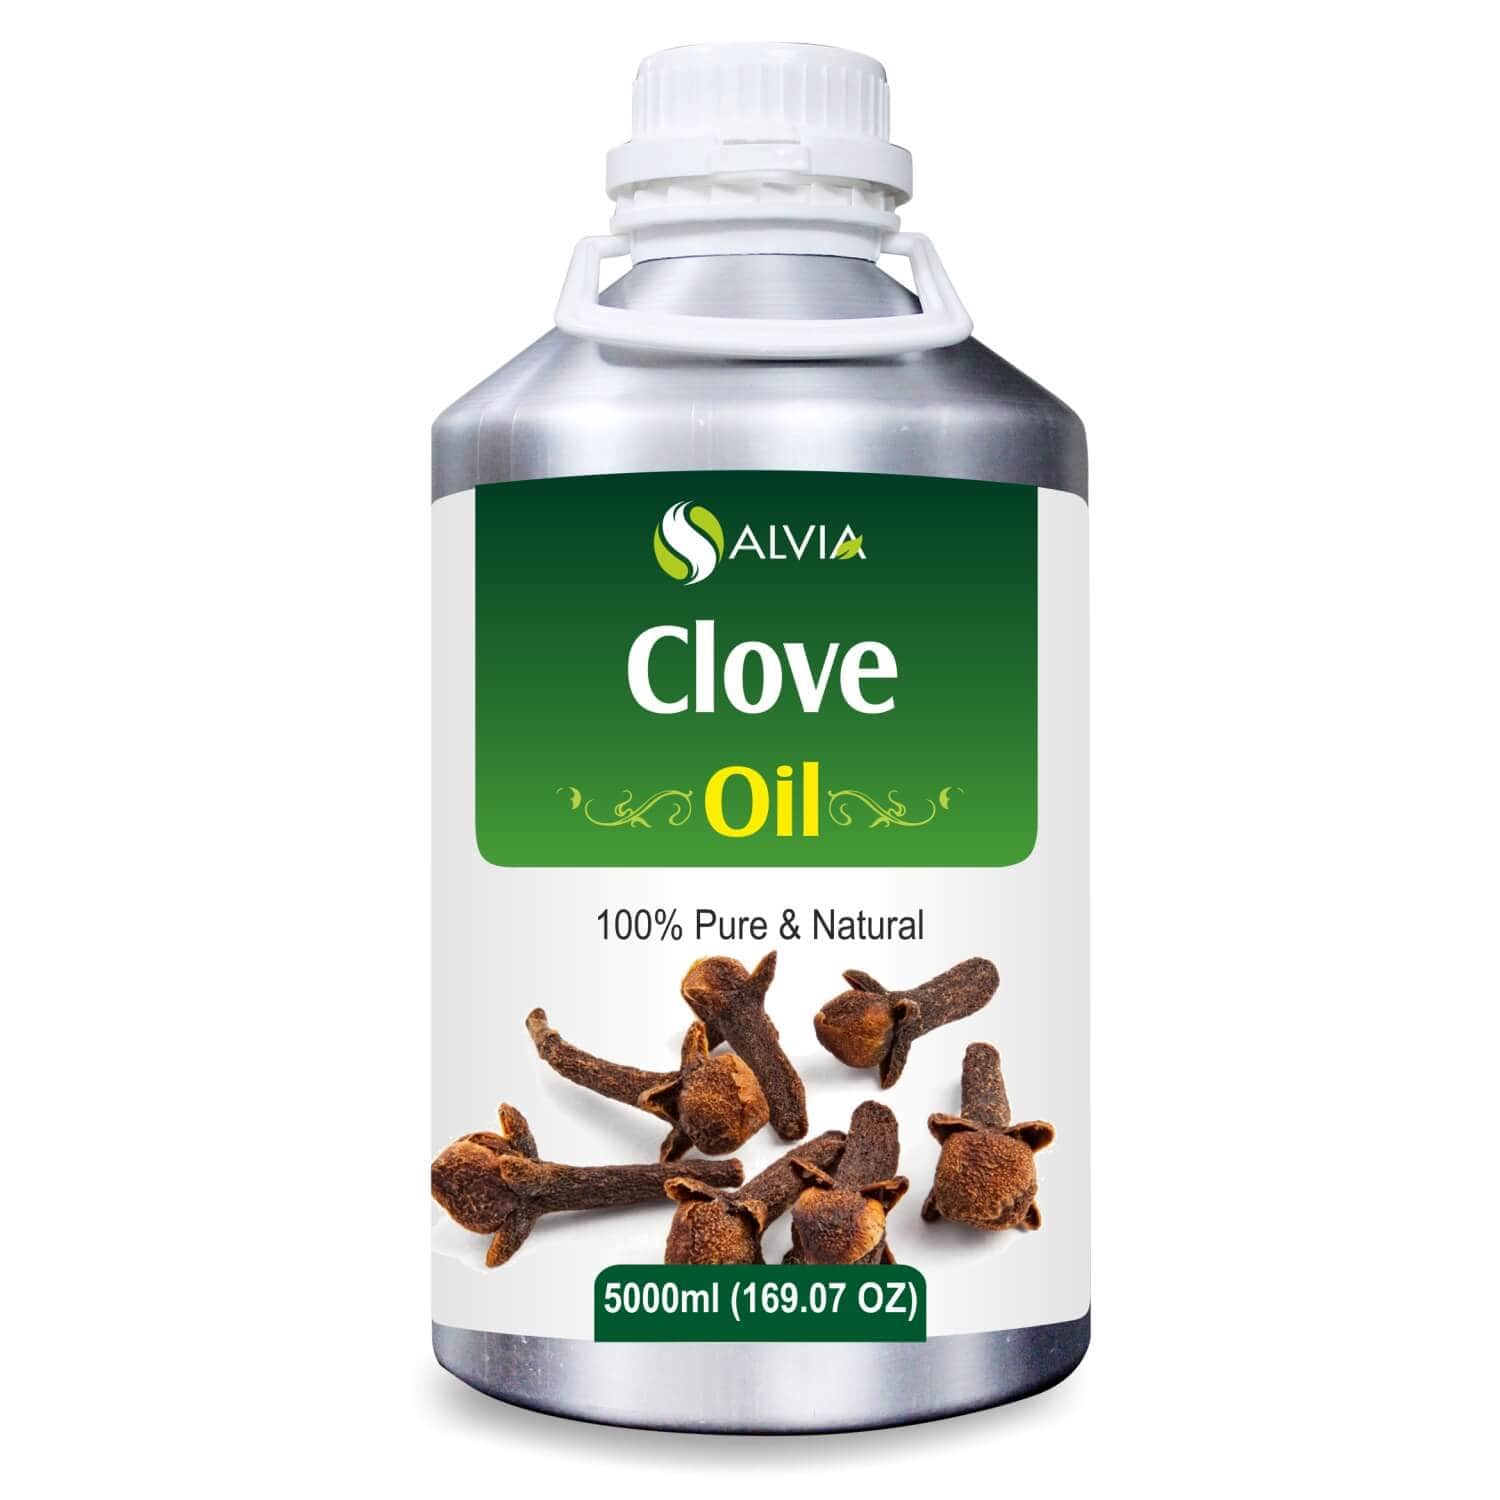 Salvia Natural Essential Oils 5000ml Clove Oil (Syzygium Aromaticum) Pure Natural Essential Oil For Aromatherapy, Making Soaps, Skin Healing, Pain Relief, Fights Bacteria